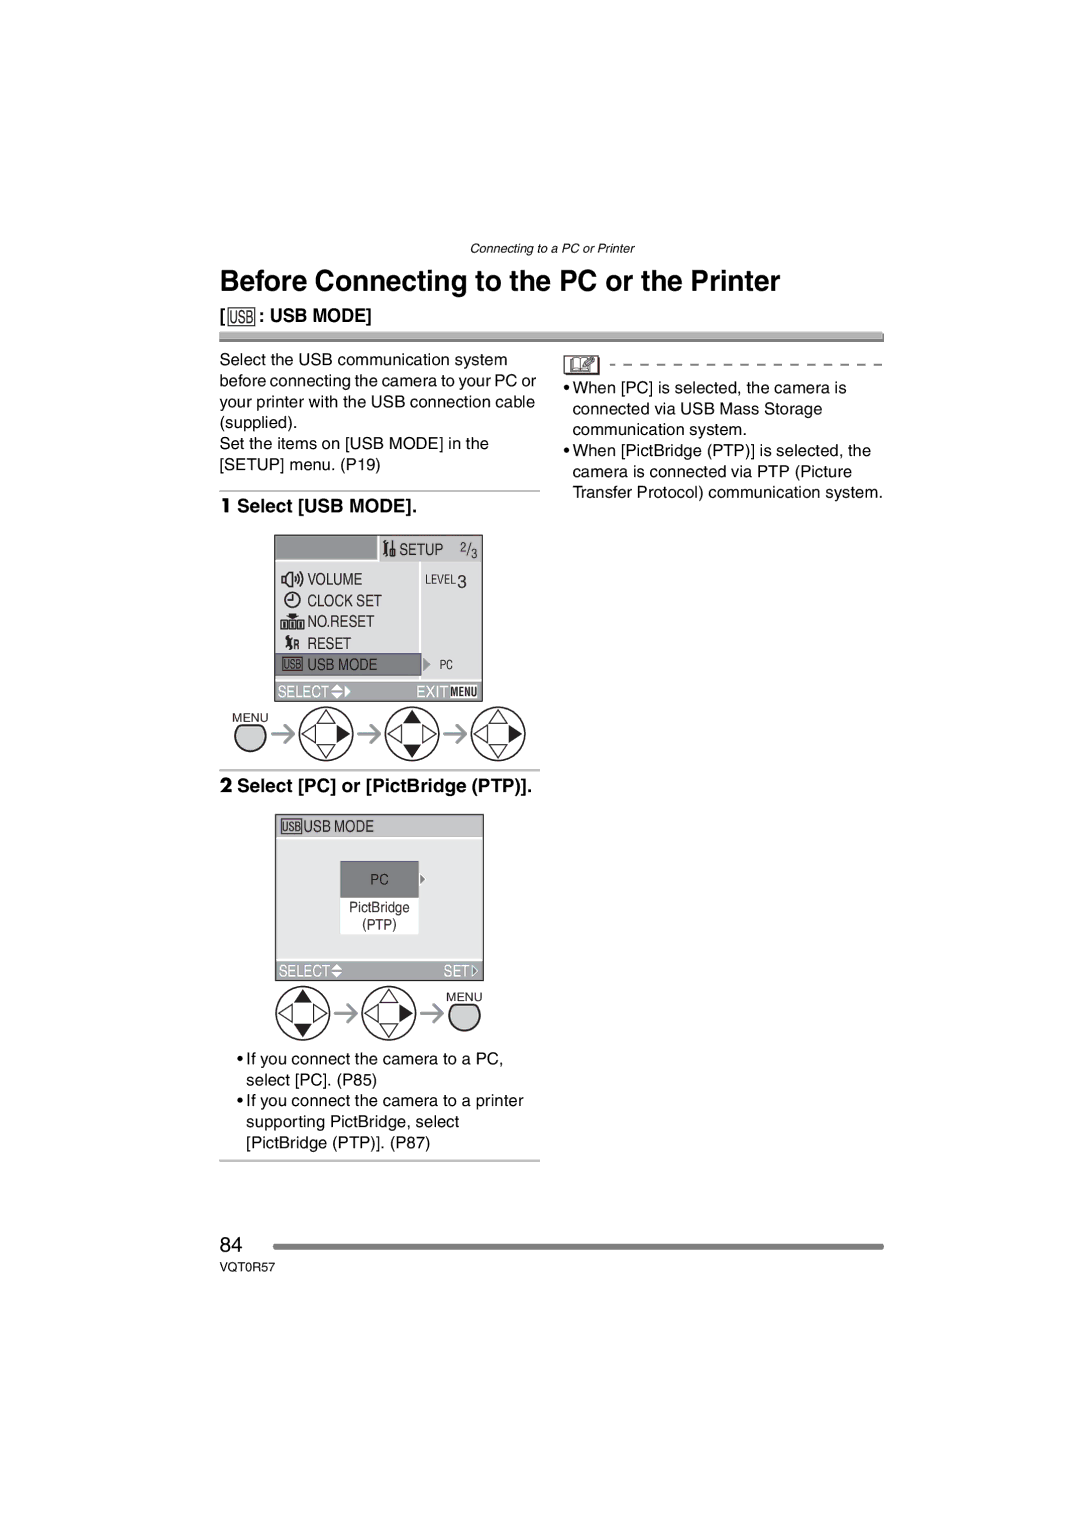 Panasonic DMC-FX8GN Before Connecting to the PC or the Printer, Select USB Mode, Select PC or PictBridge PTP 